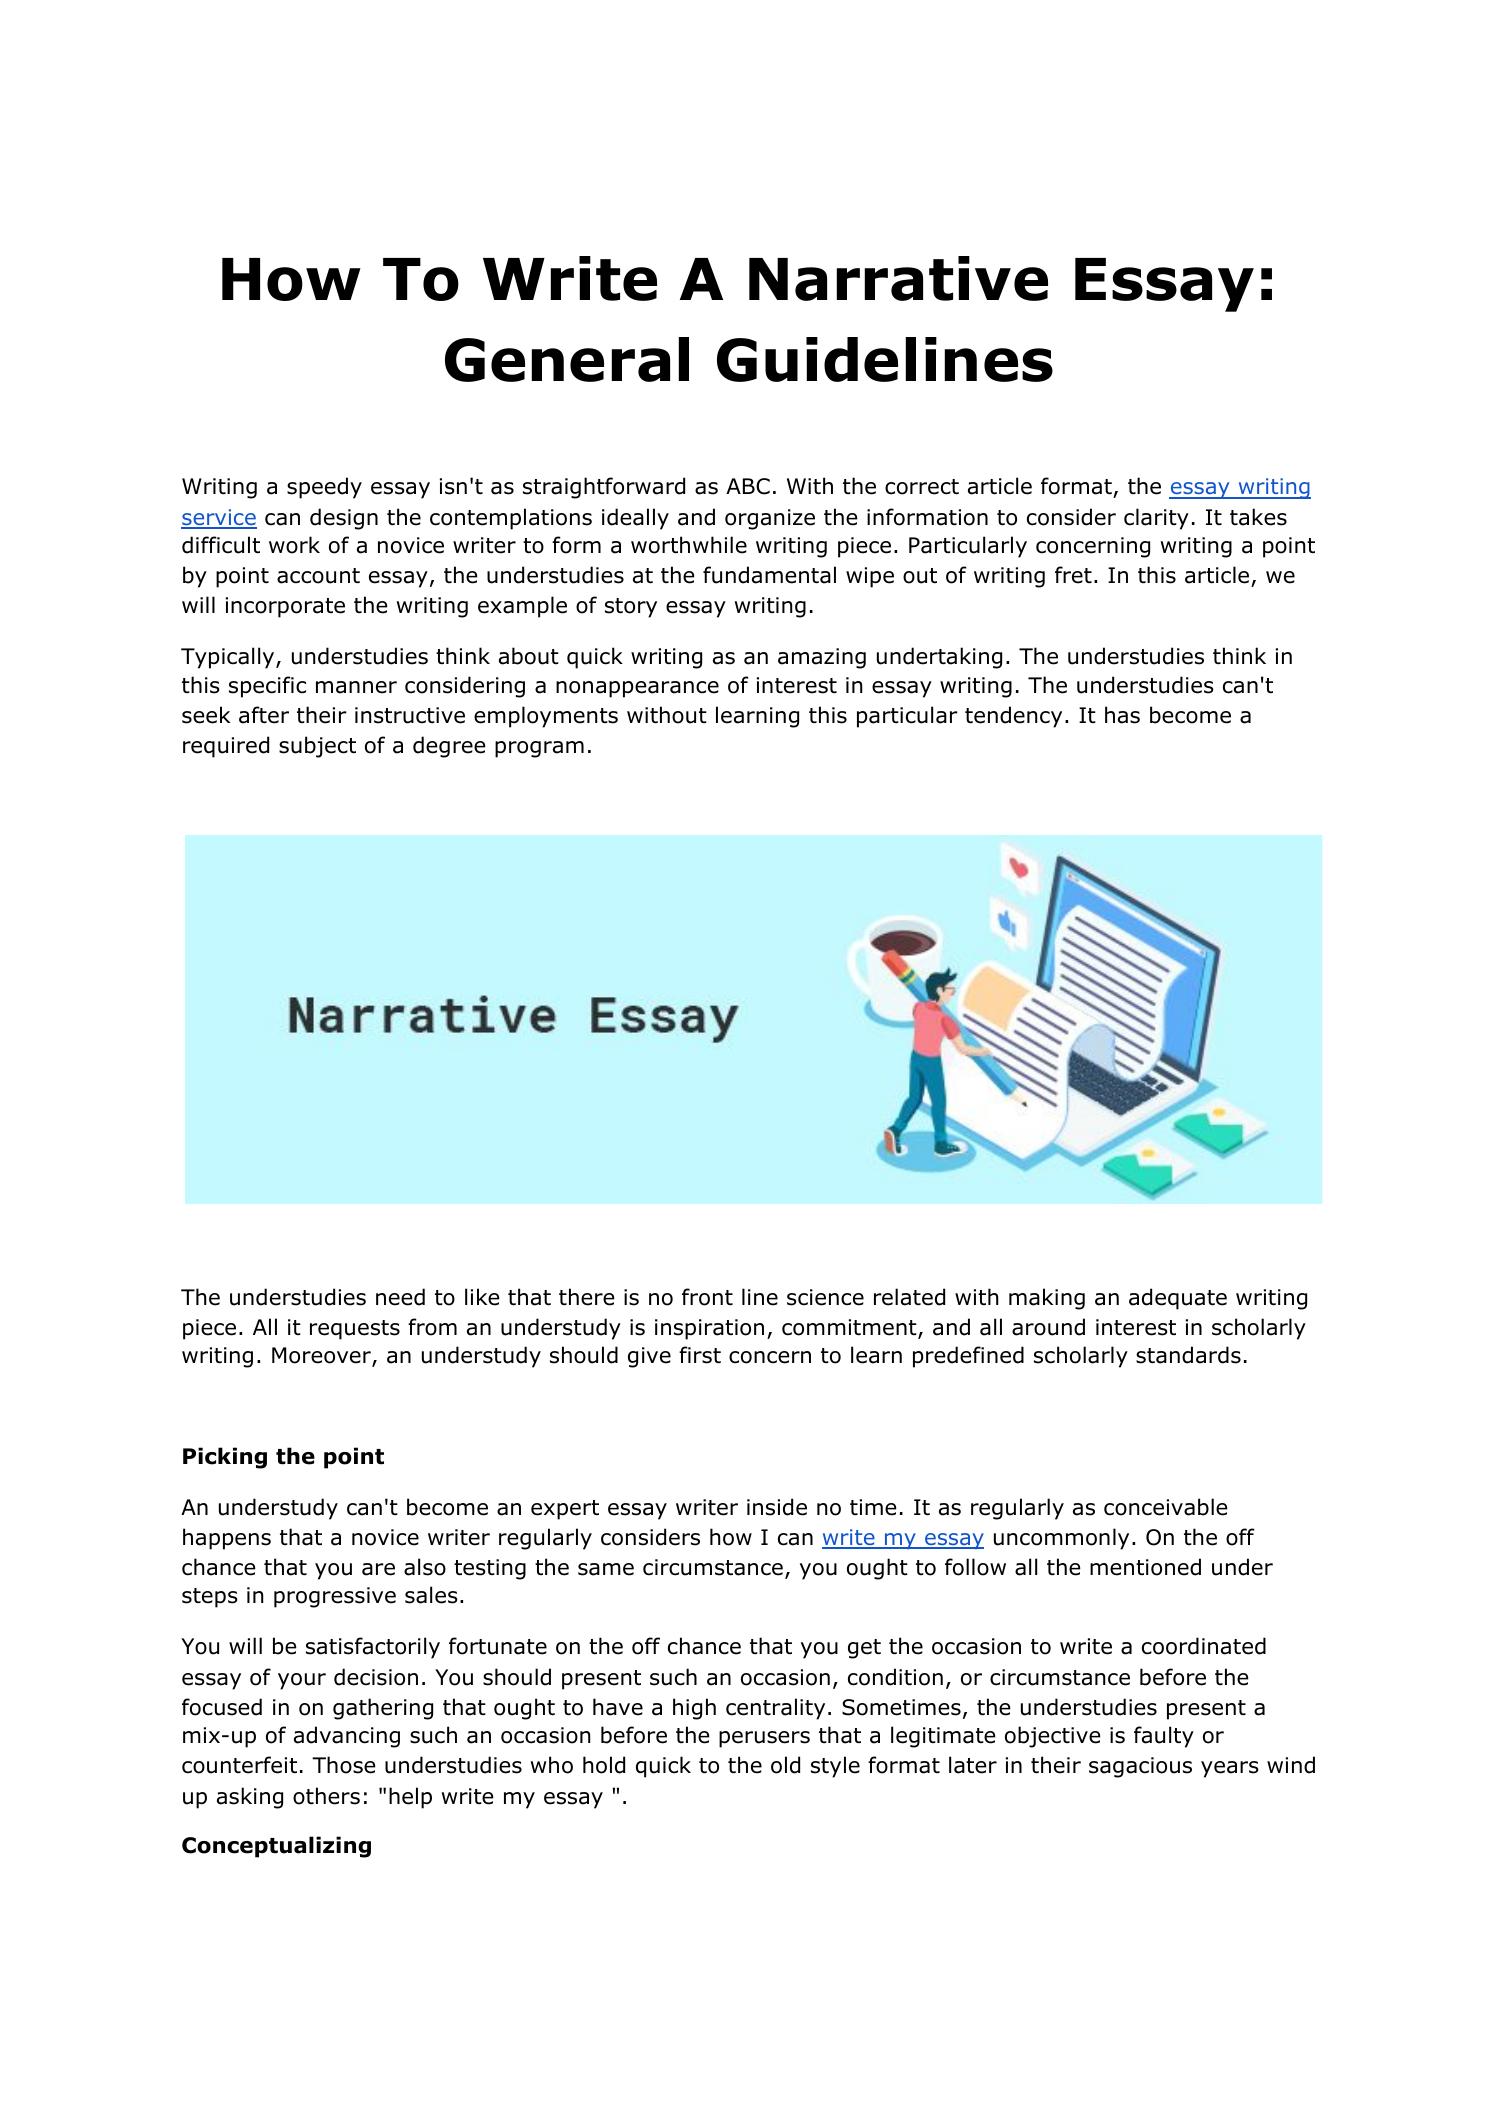 guidelines in writing a narrative essay